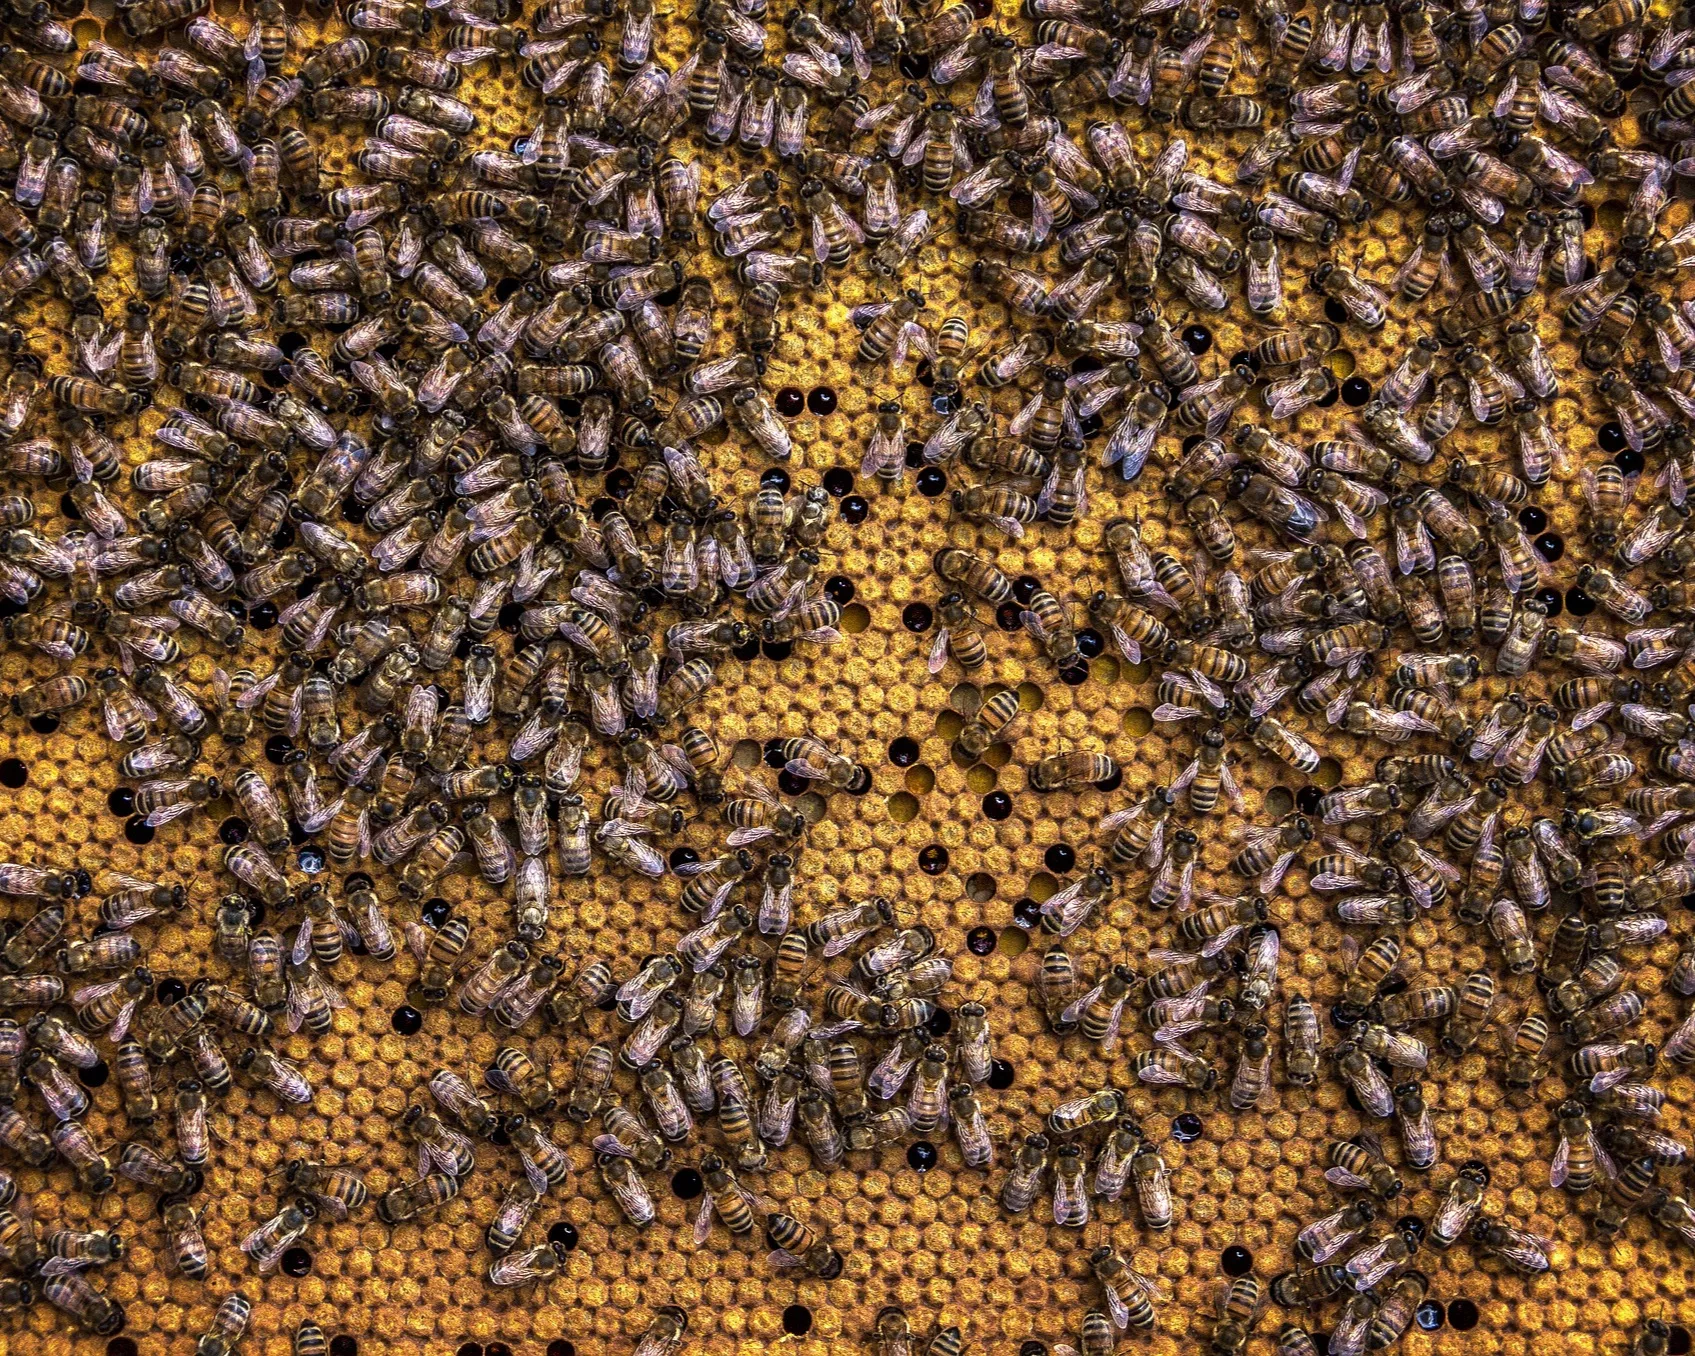 The rise of bee activism – how these humble insects have inspired a mass movement